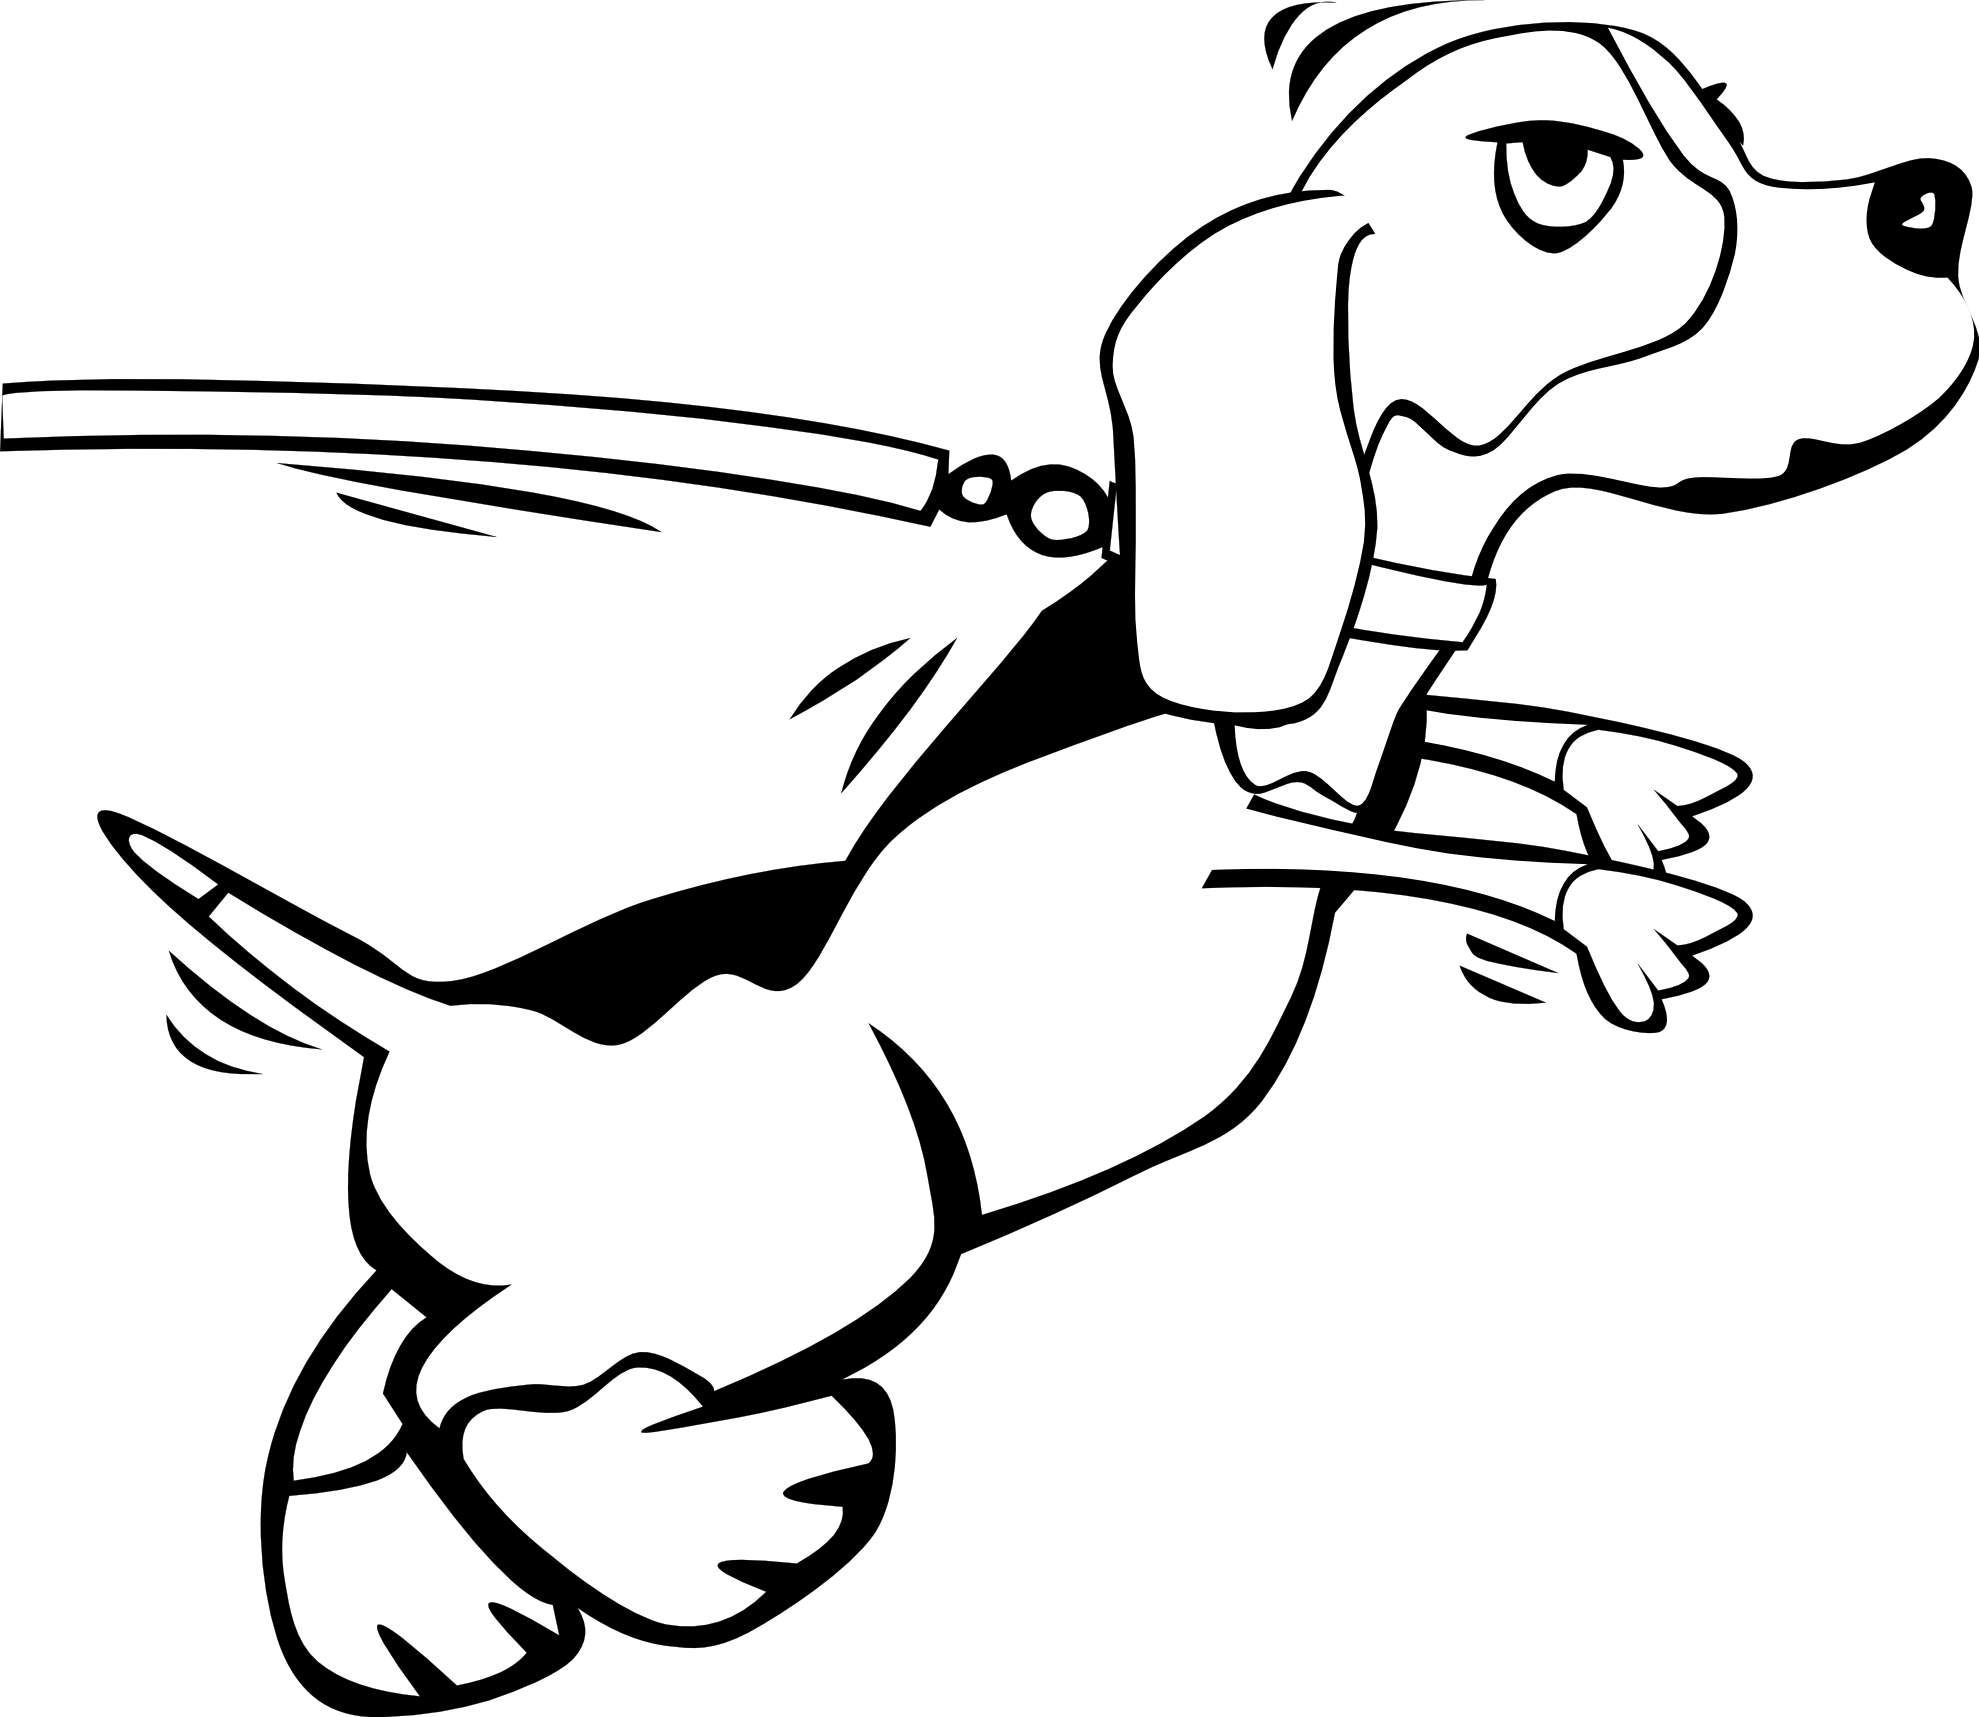 Black And White Dog Cartoon   Free Cliparts That You Can Download To